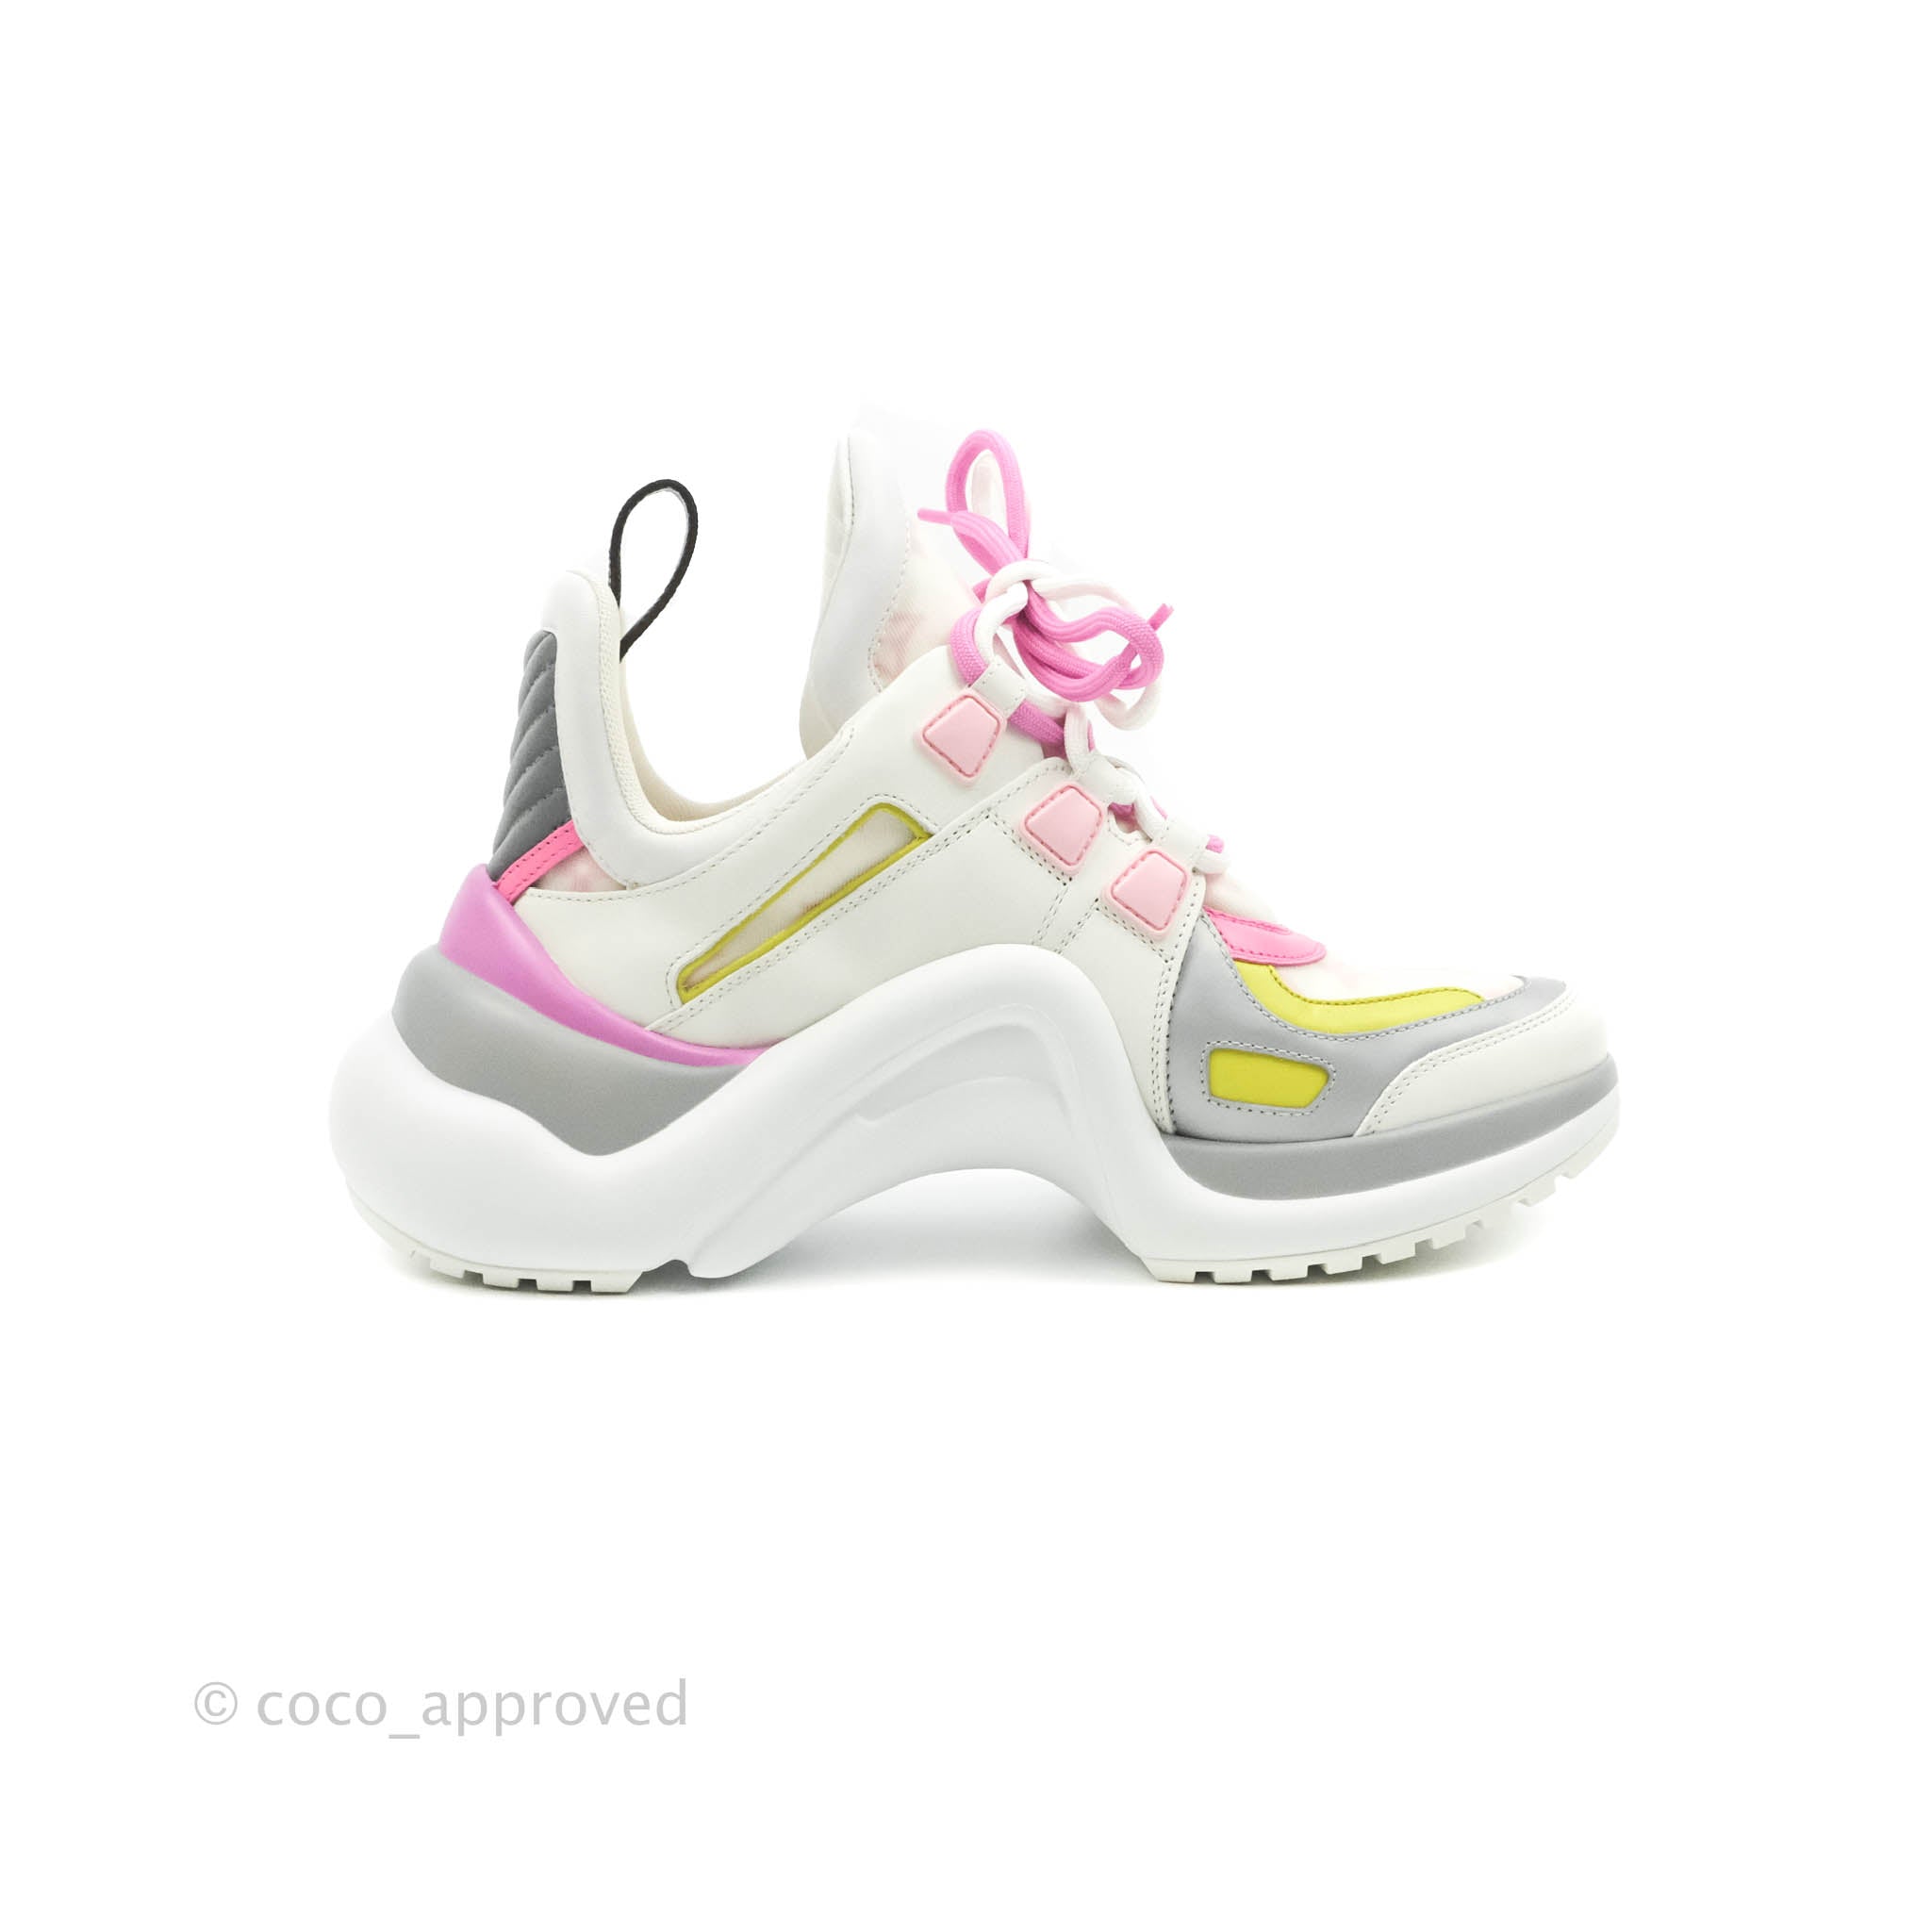 louis vuitton archlight sneakers pink